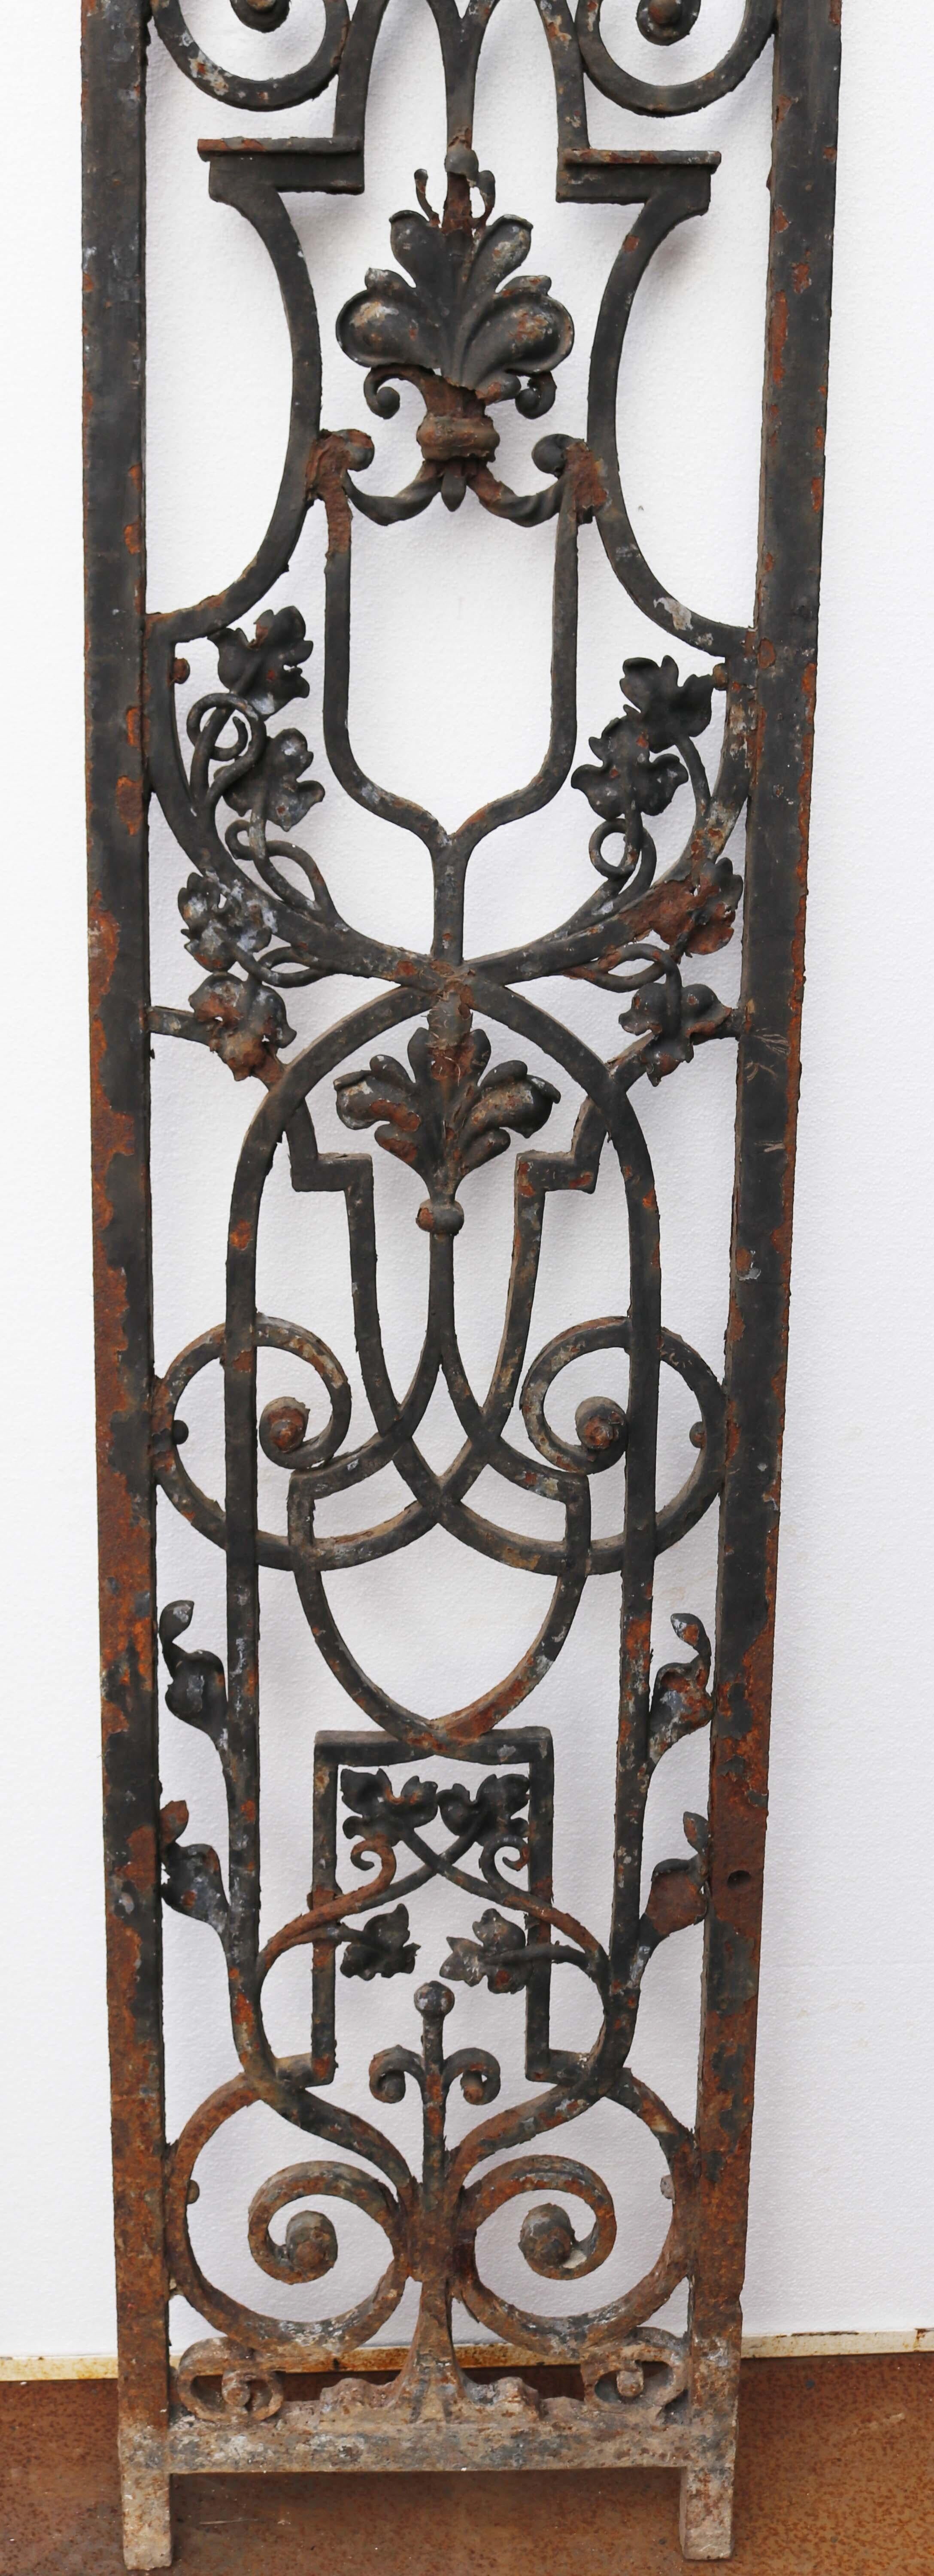 Two large Georgian wrought iron panels. Two Georgian, wrought ironpanels in the Neoclassical and Regency style. The panels have a beautiful weathered finish. They are decorated on the front side and have plain backs.
 
Additional